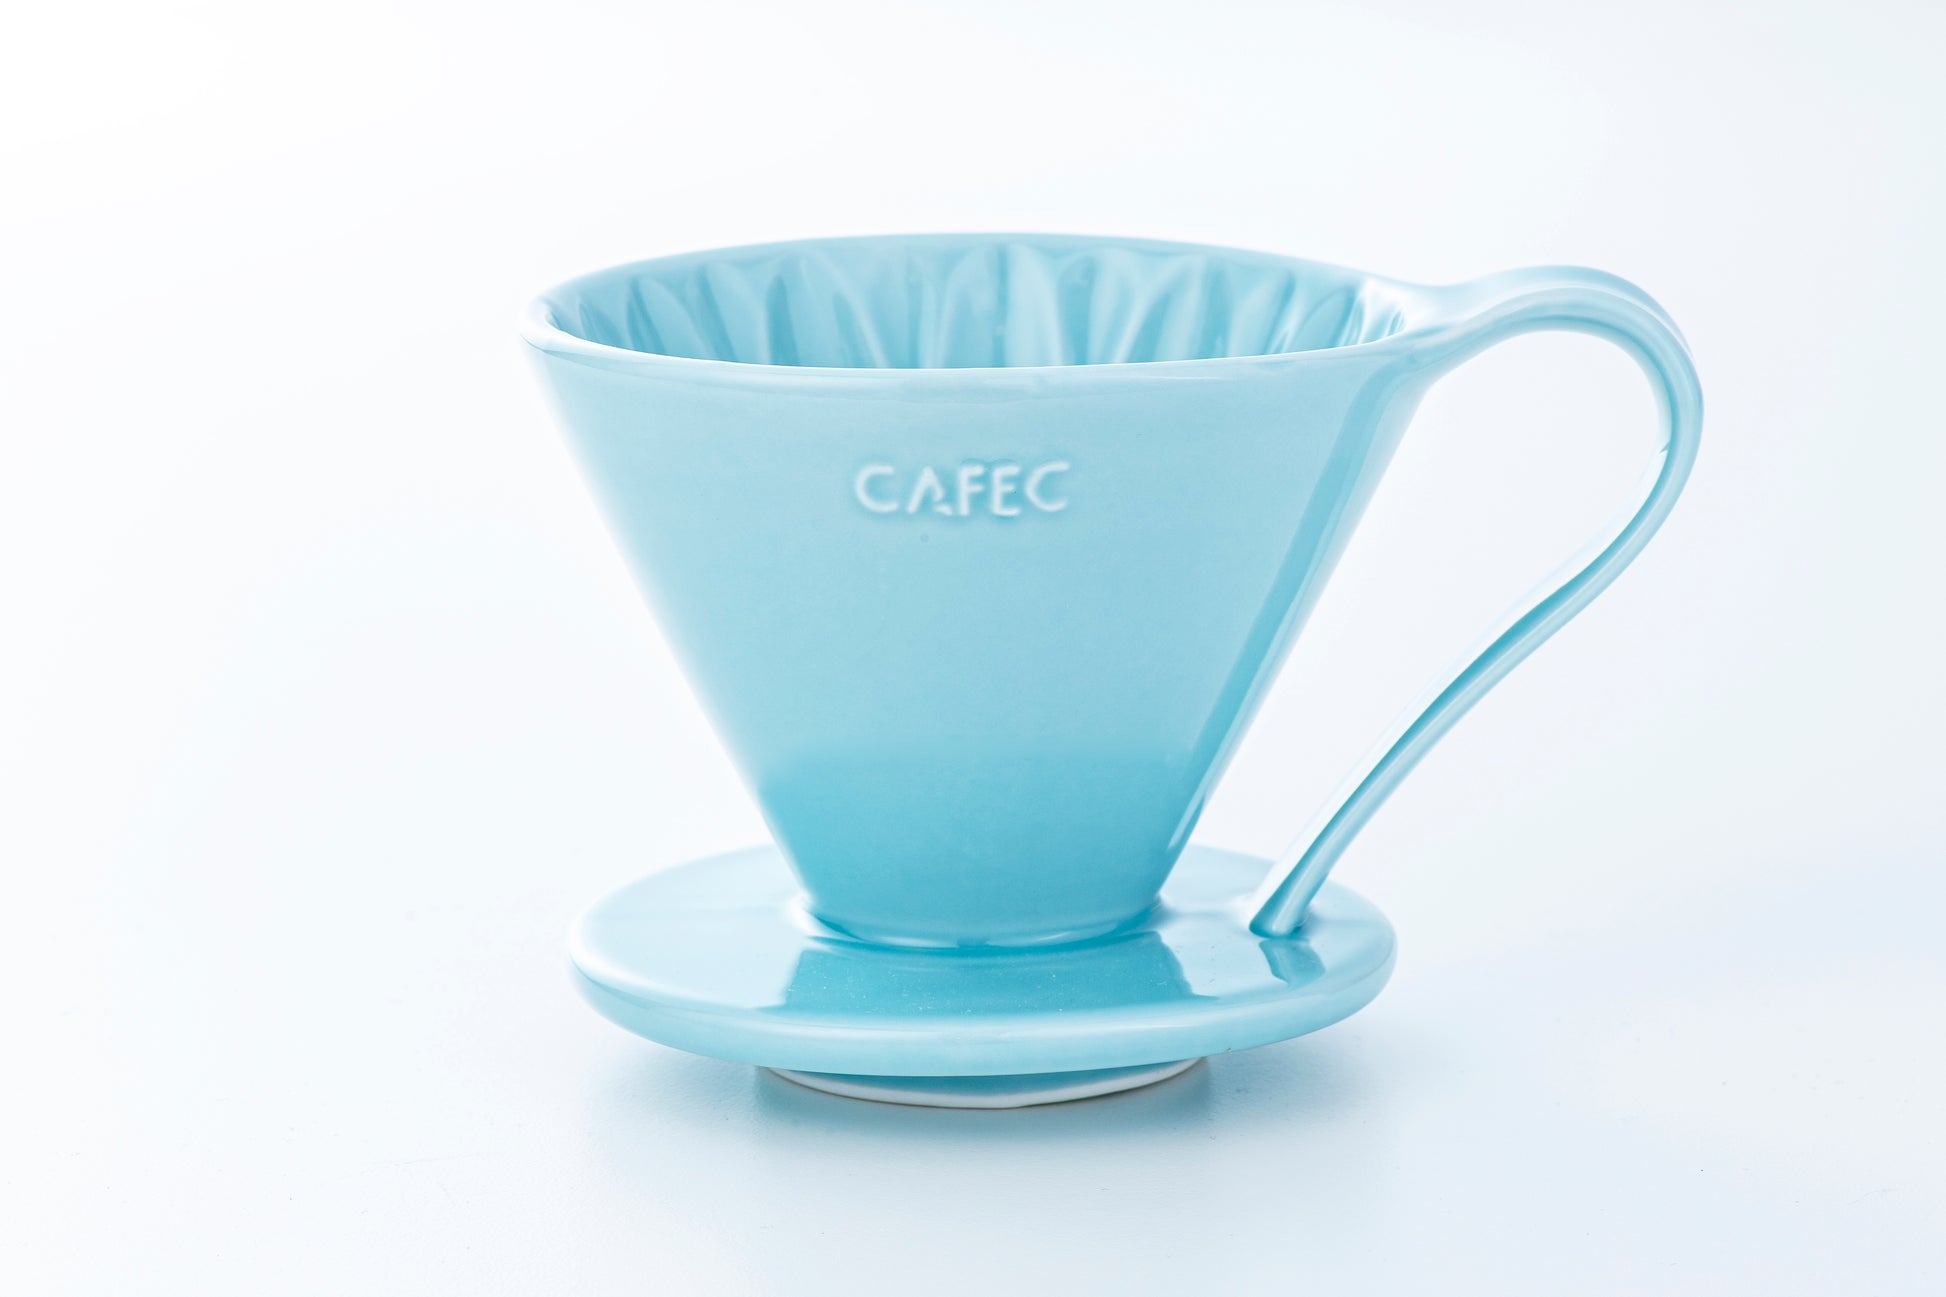 Cafec - Cone-Shaped Flower Dripper Size 04 (Blue Color)